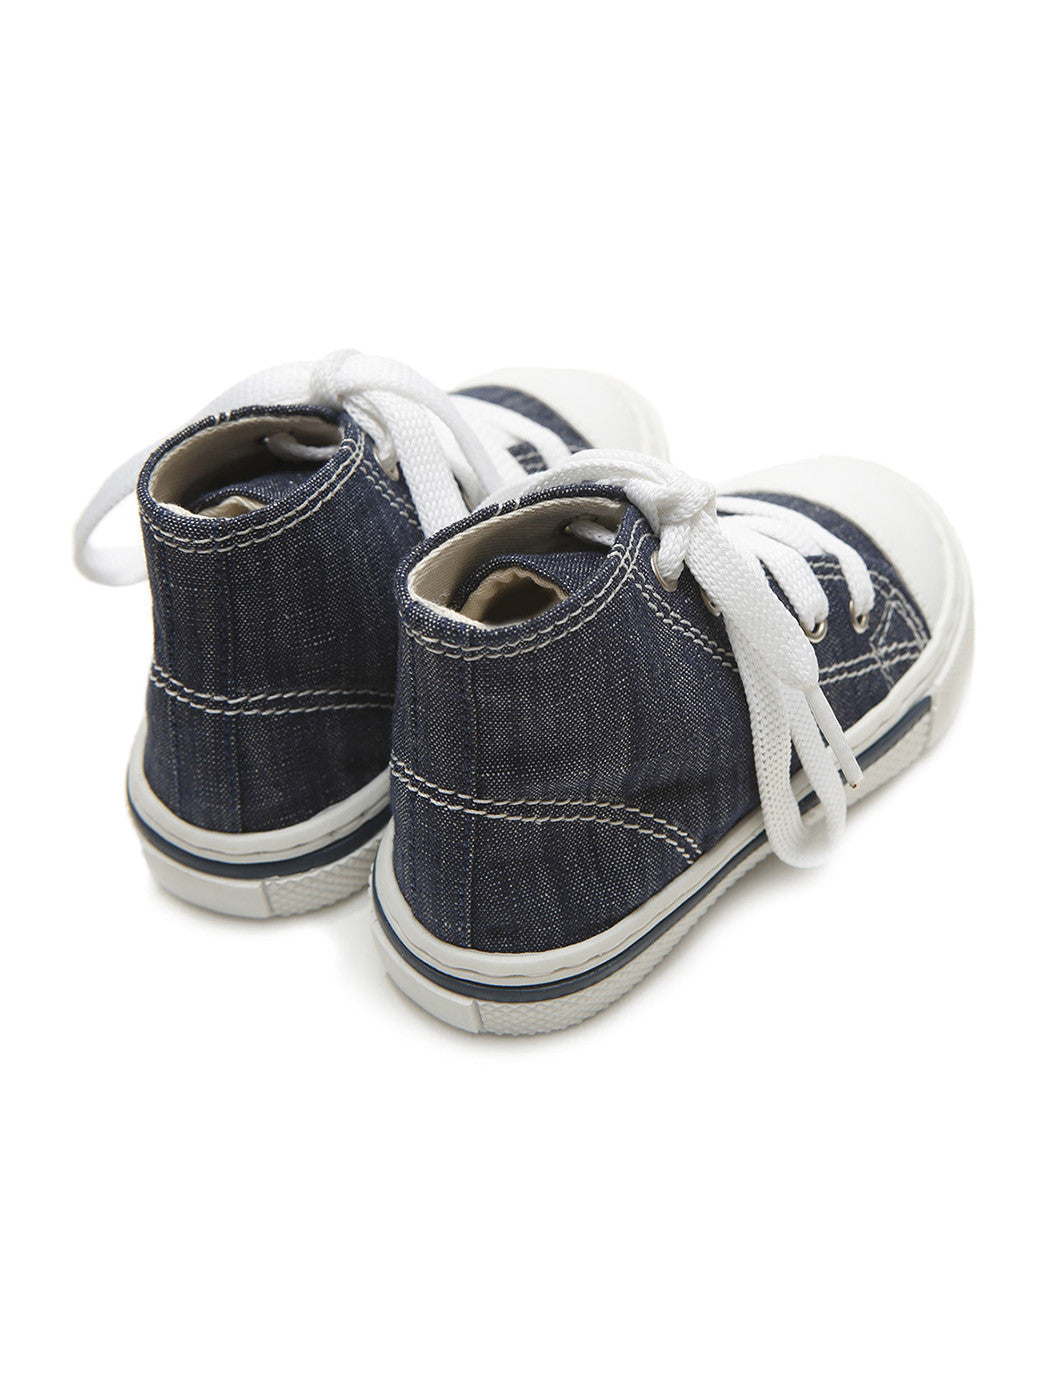 Baby bootie shoe for boy - GAS Blue